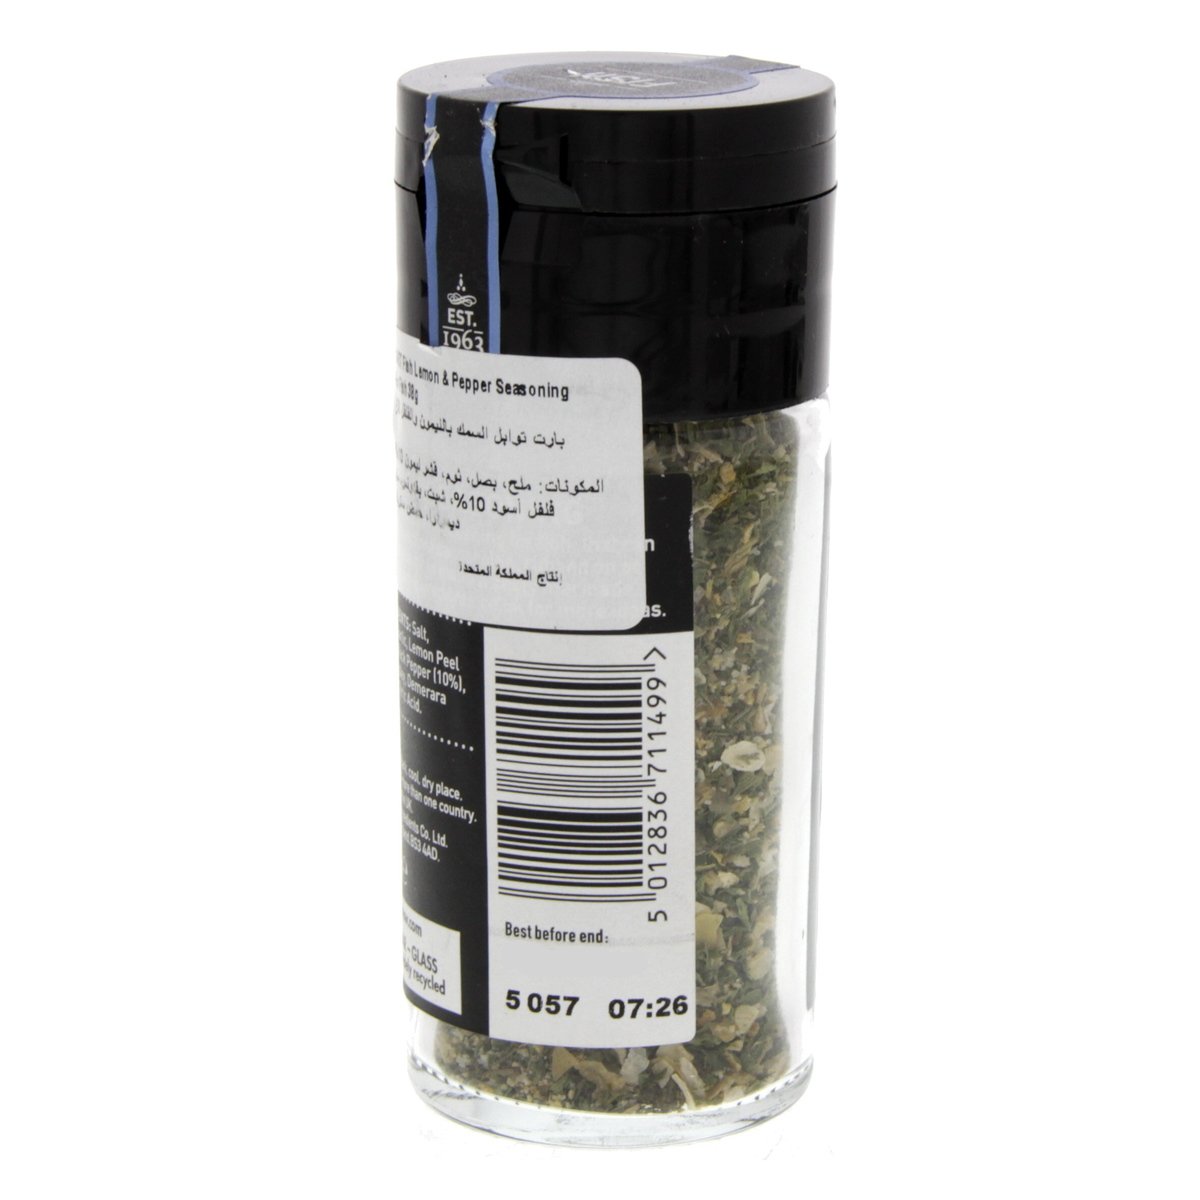 Bart Fish A Lemon And Pepper Seasoning For All Fish 38g